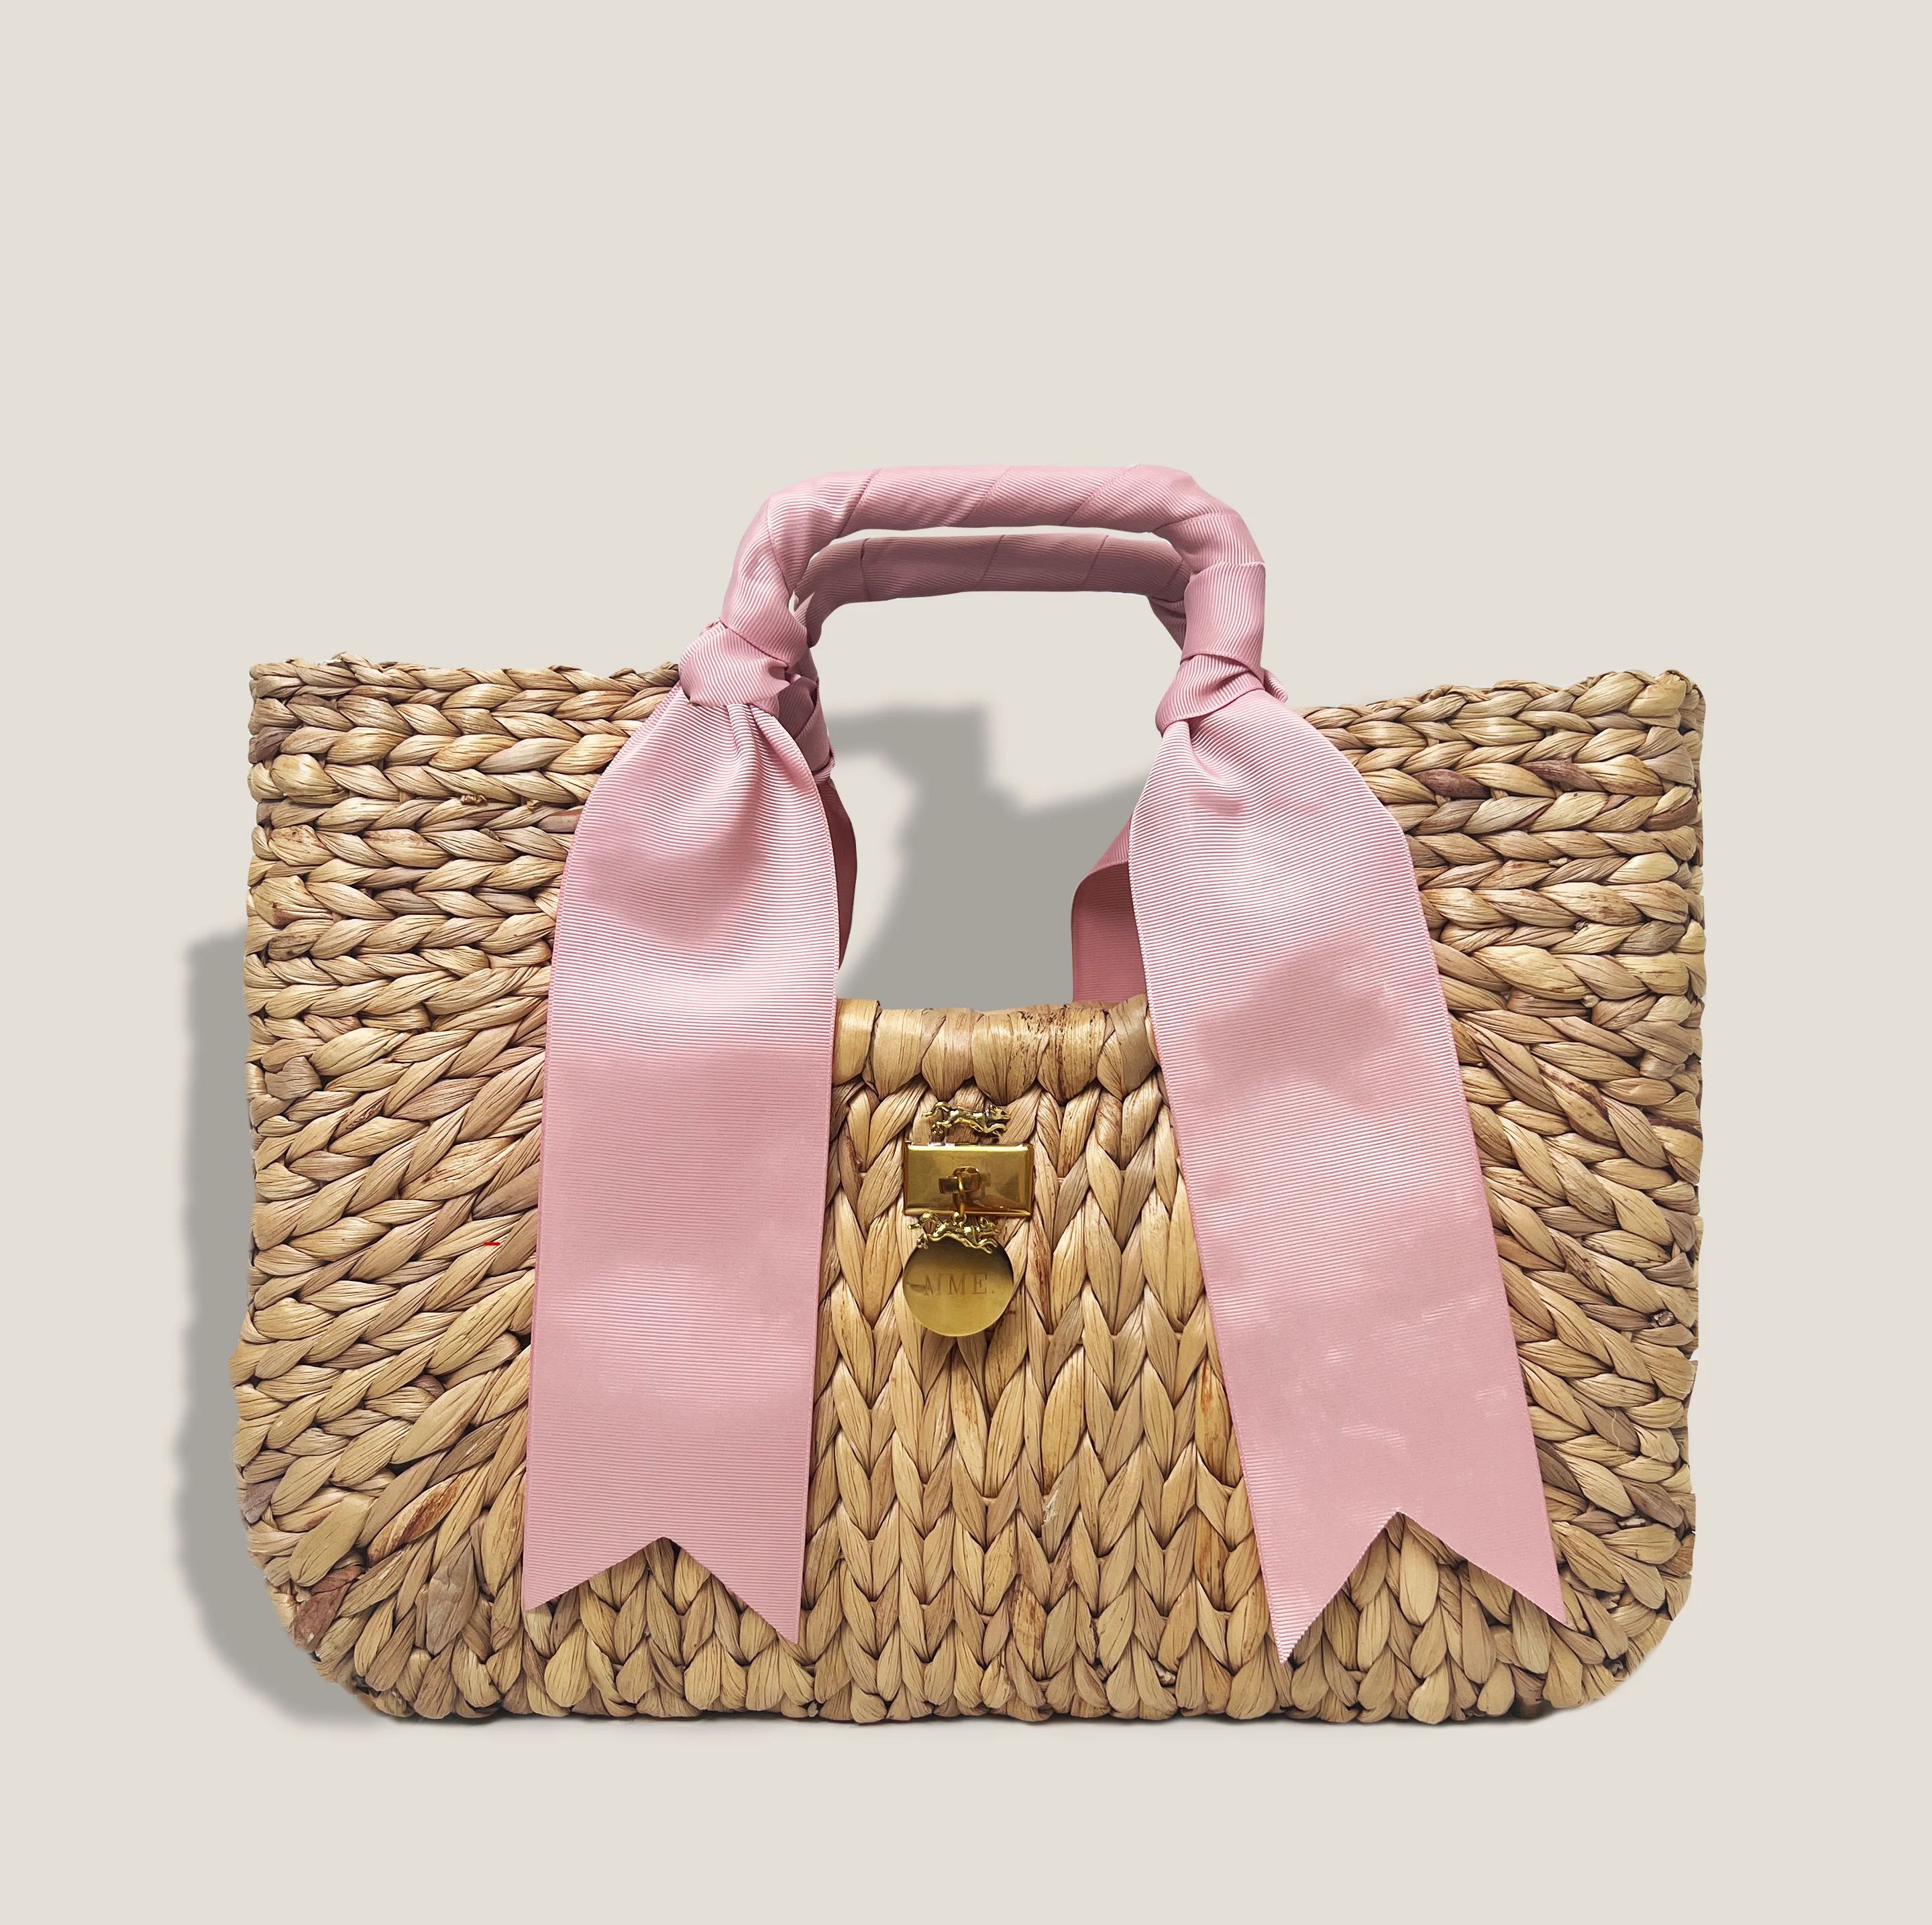 MME. FOREVER HOLIDAY BENTLEY TOTE - ROSE PINK | MME.MINK